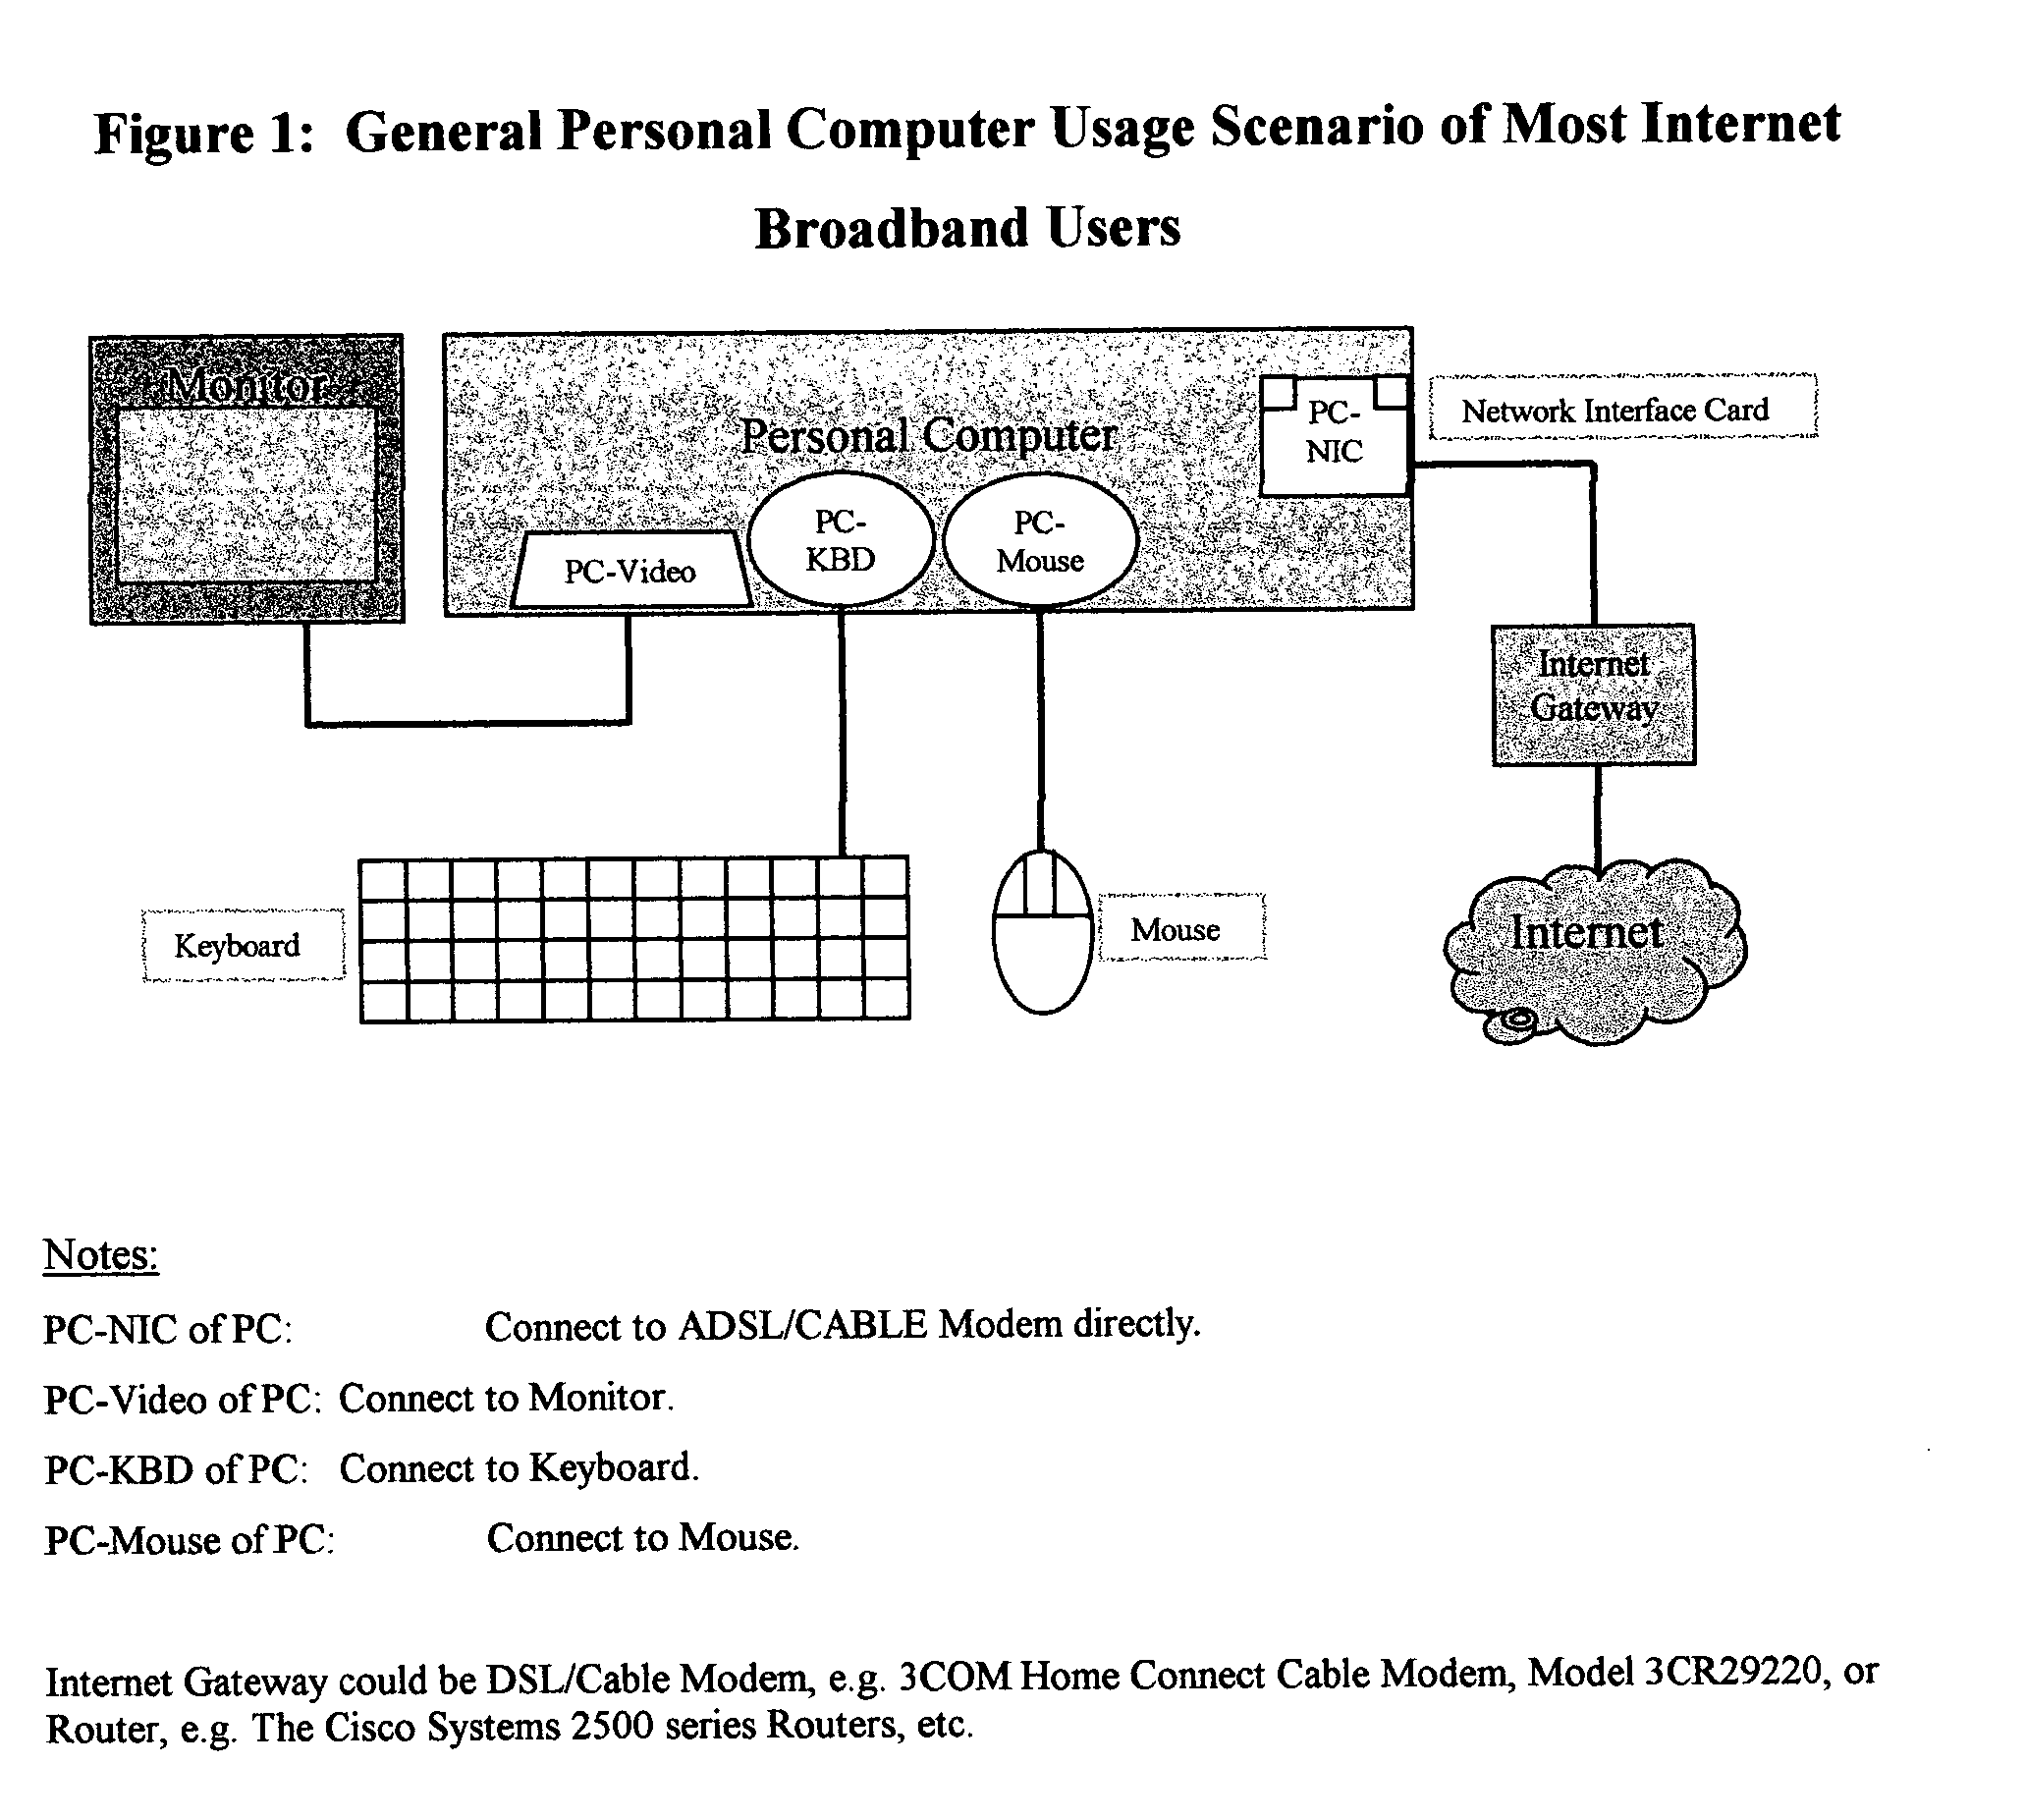 Method and system for an "Always-on" internet device